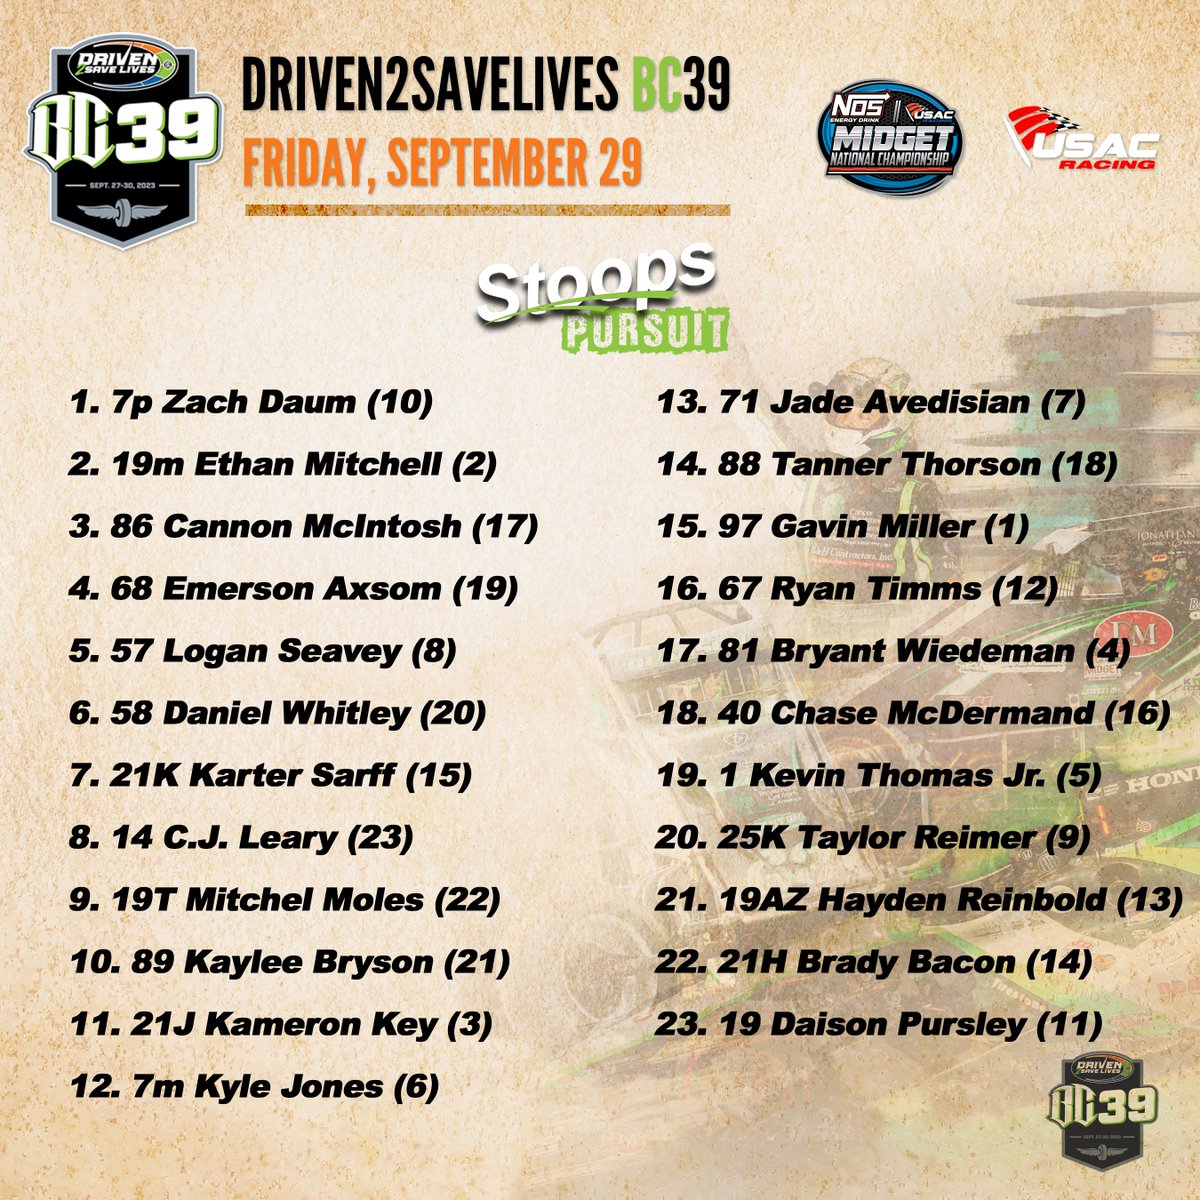 Stoops Pursuit Results USAC @NosEnergyDrink National Midgets The Dirt Track at @IMS @Driven2Save #BC39 (Starting Positions in Parentheses)